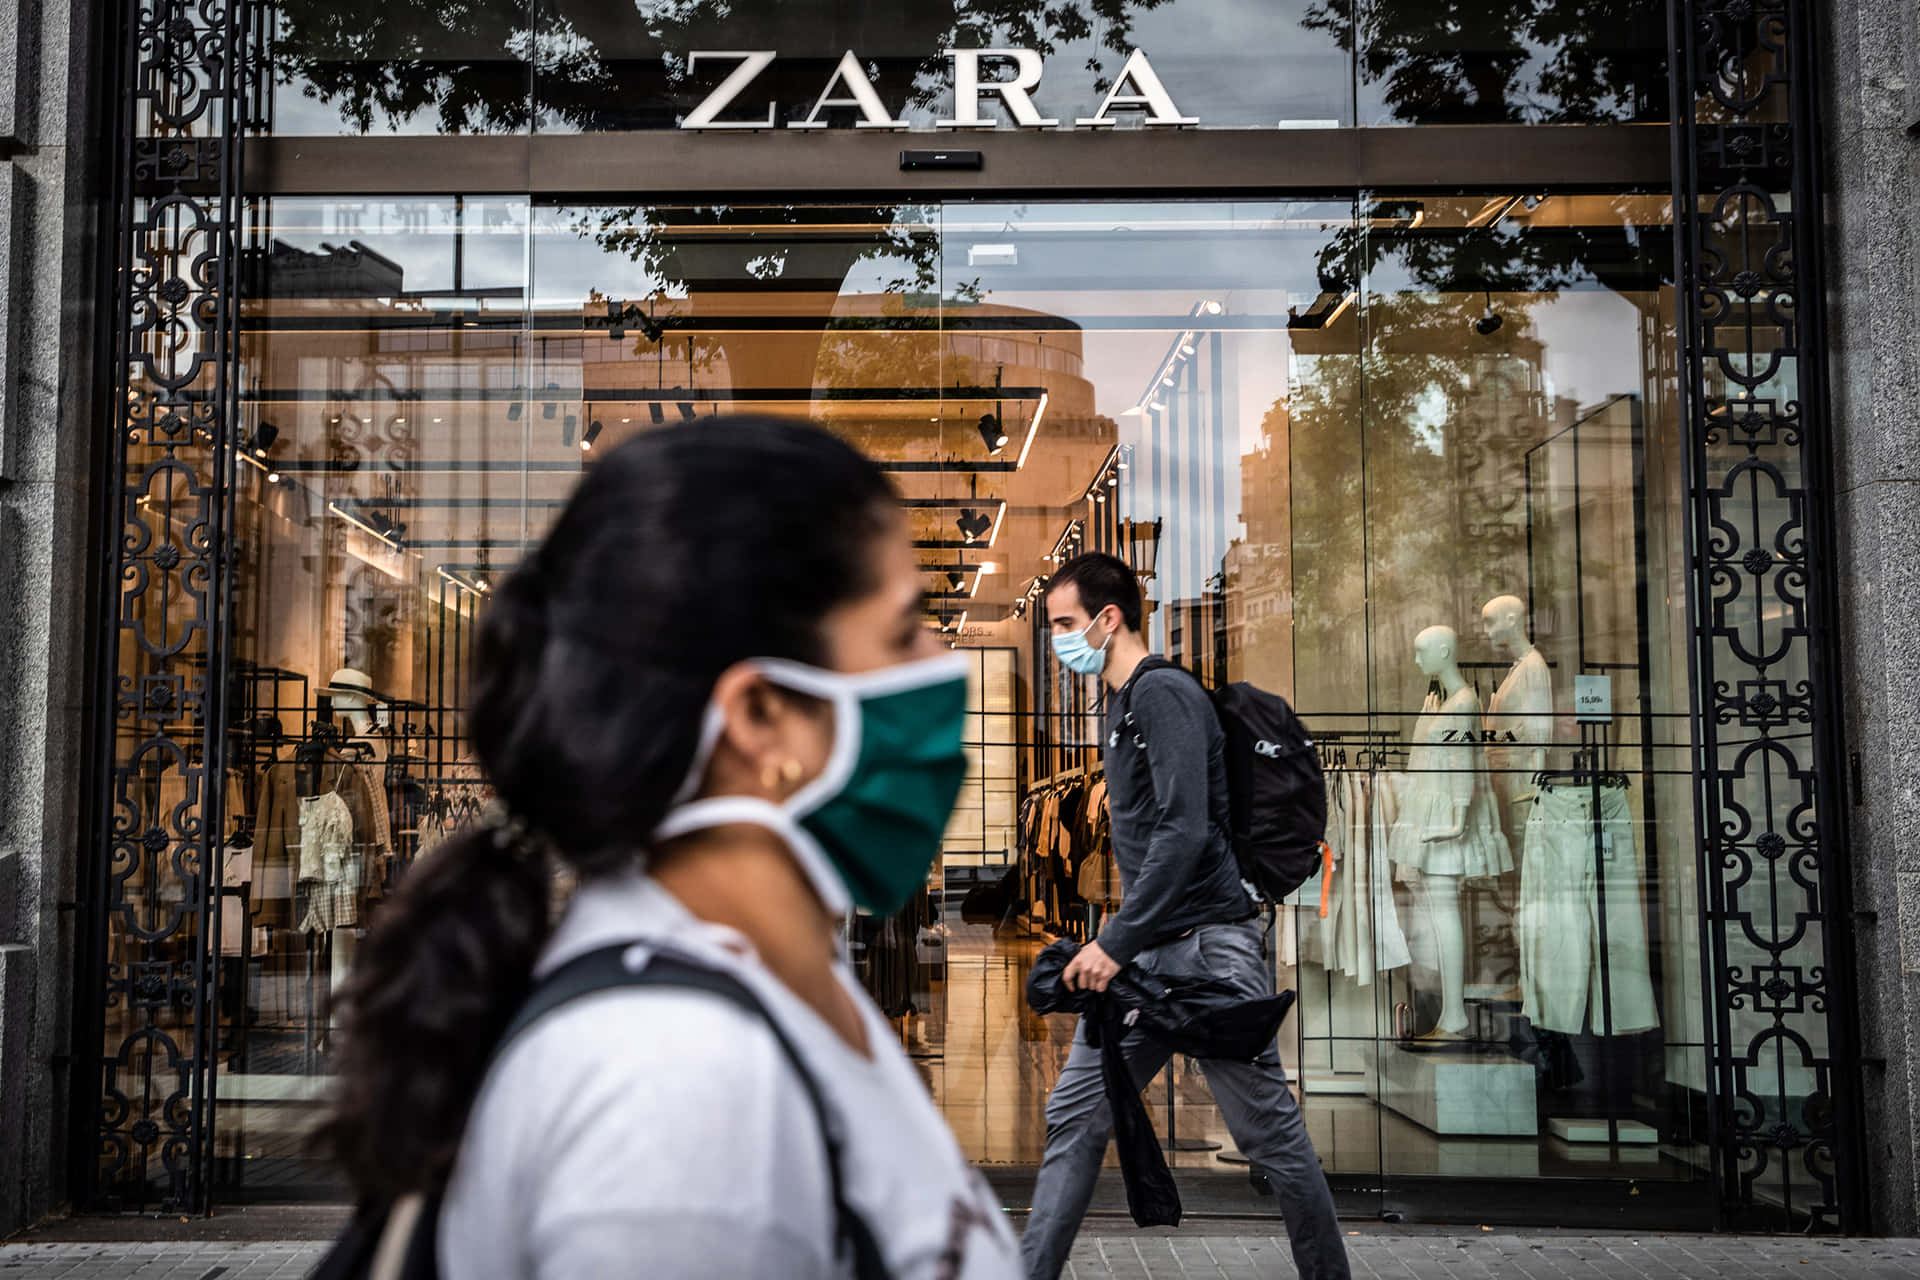 Express your style with Zara